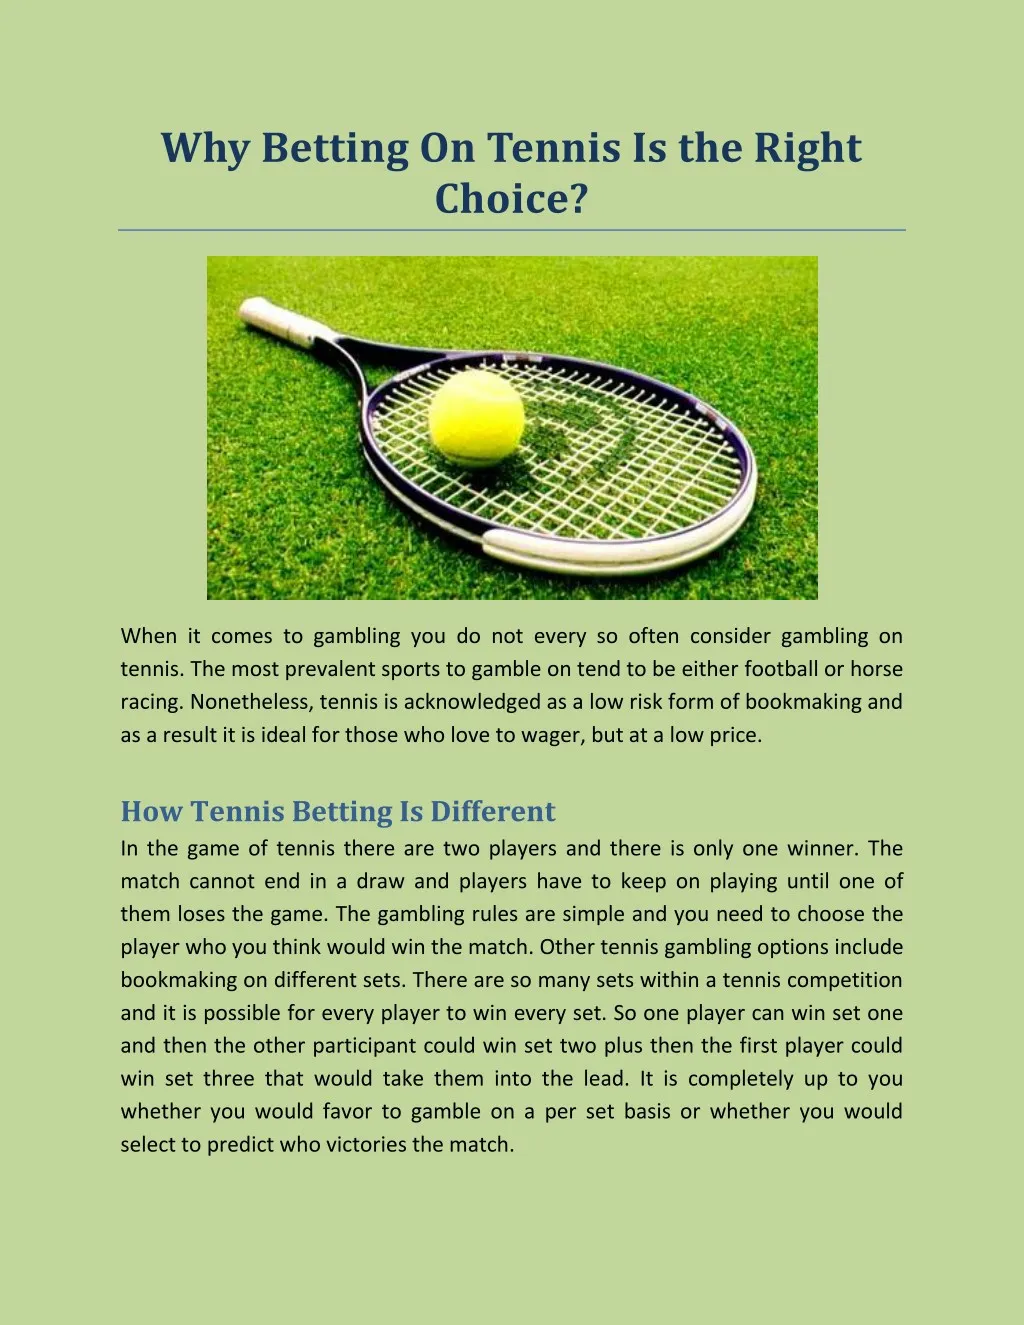 why betting on tennis is the right choice